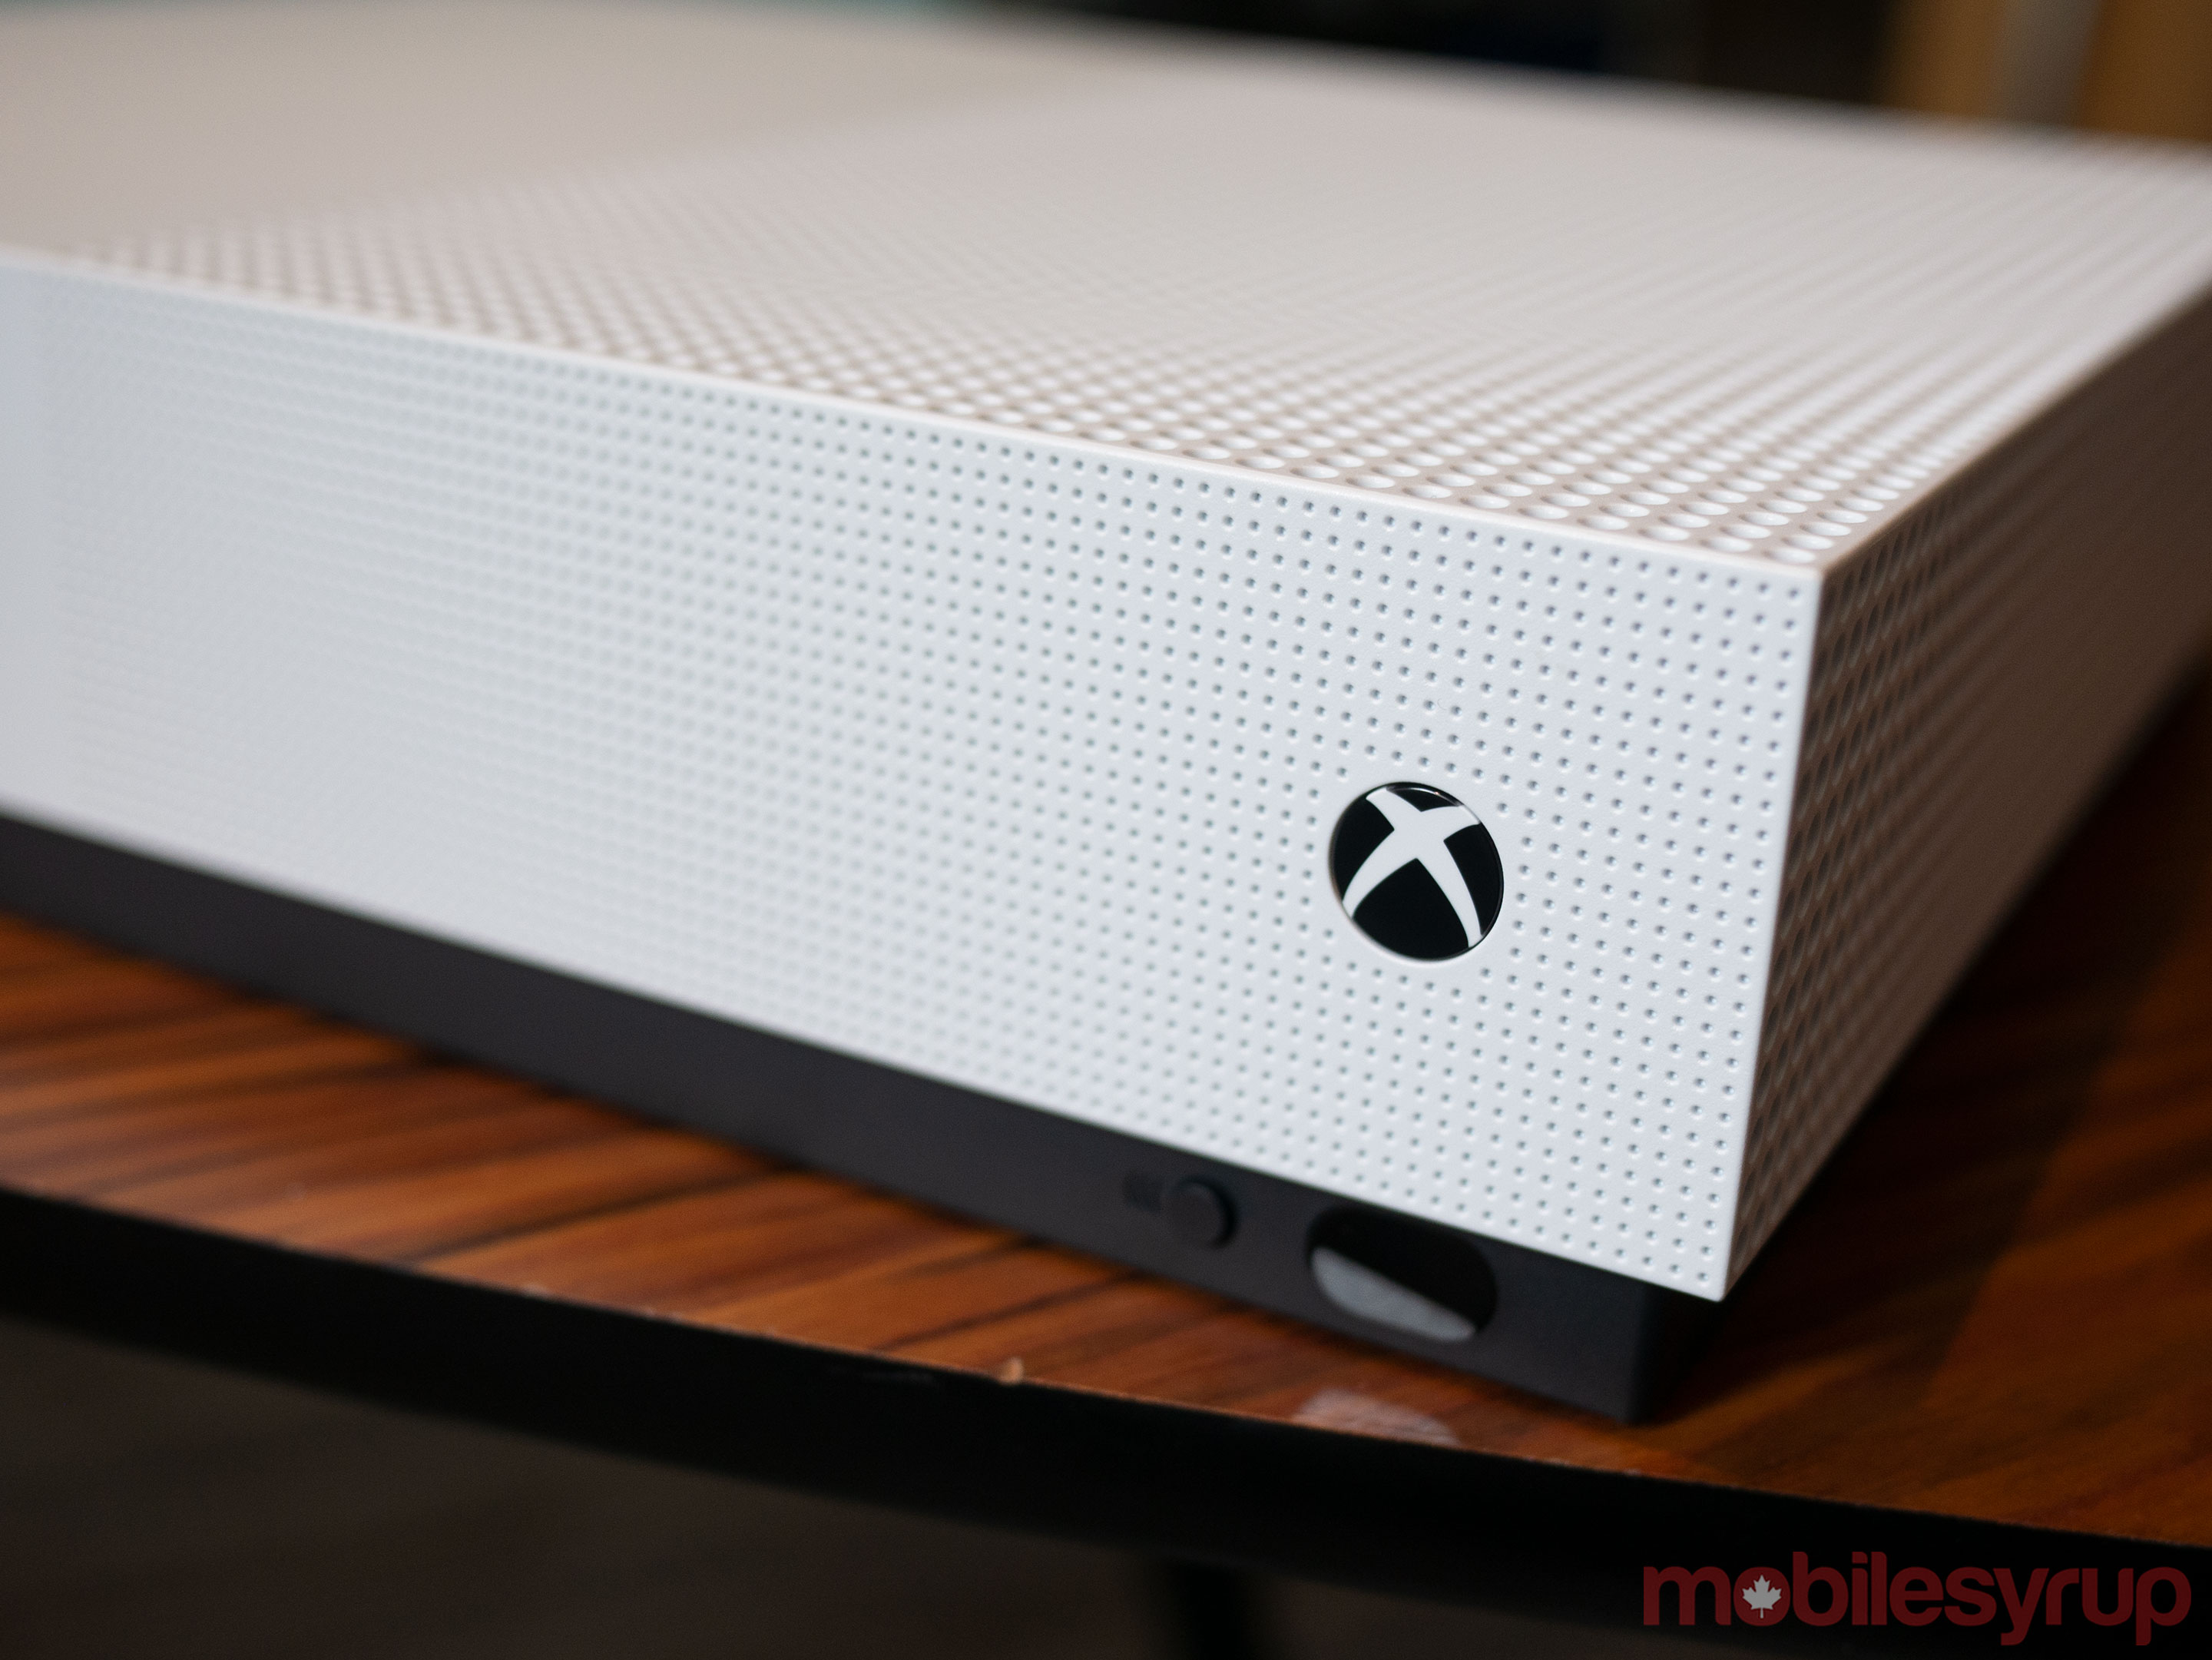 Microsoft's Xbox One S All-Digital Edition is an interesting 